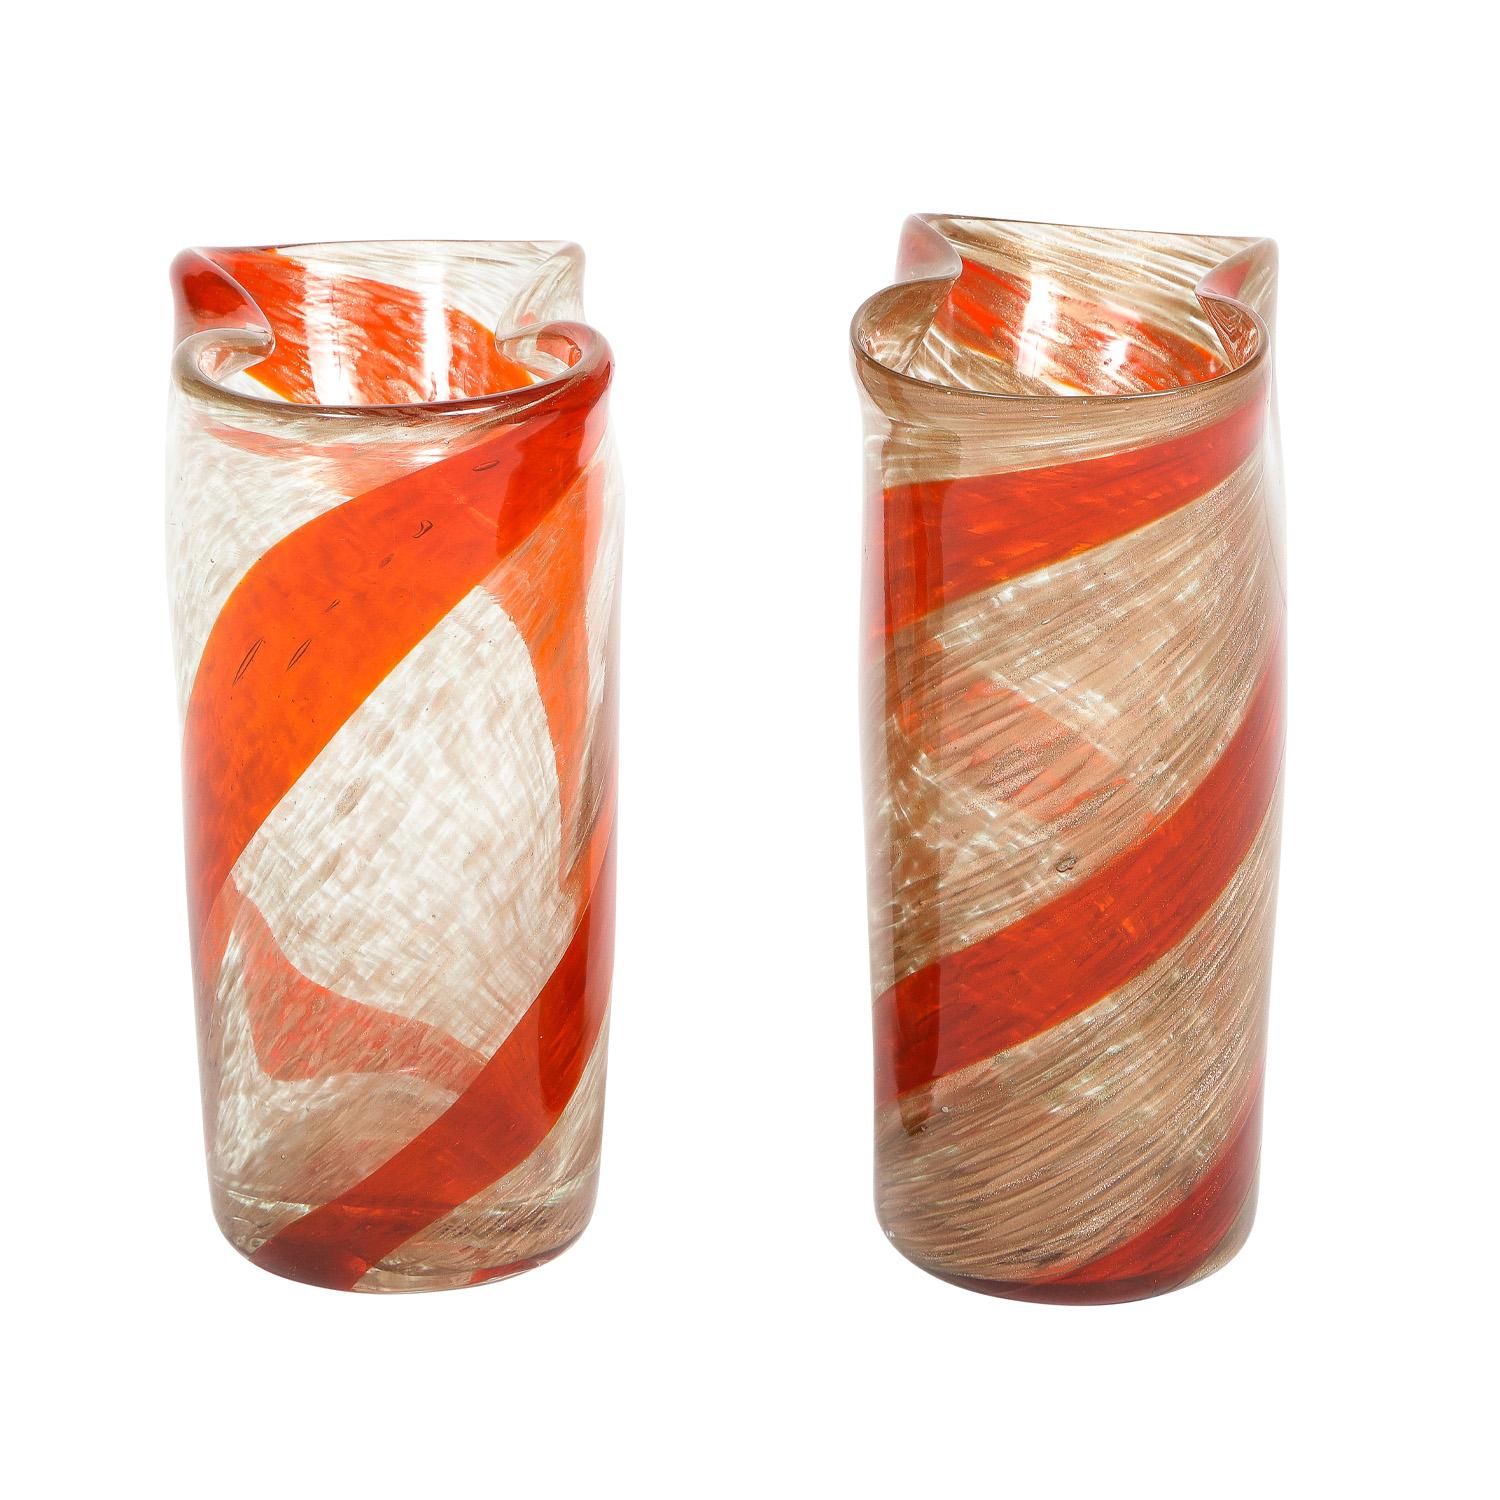 Modern Fratelli Toso Pair of Pinched-Top Glass Vases with Red Spiral, 1950s For Sale